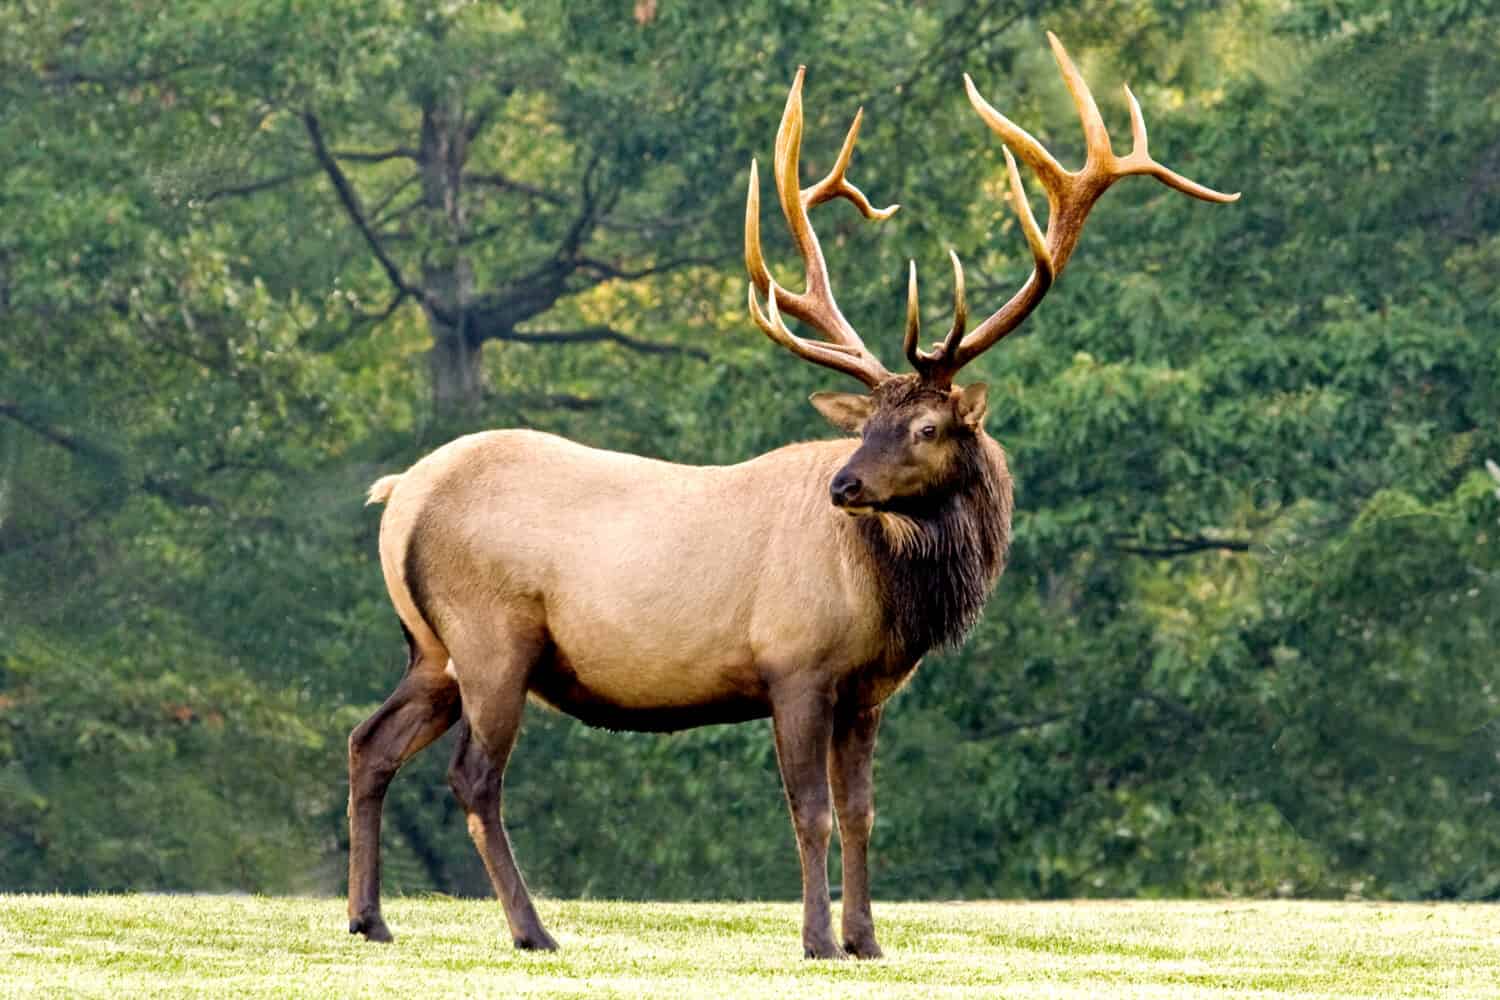 Serenade of the Wild: Revering the Noble Presence of an Elk in its Pristine Natural Realm.